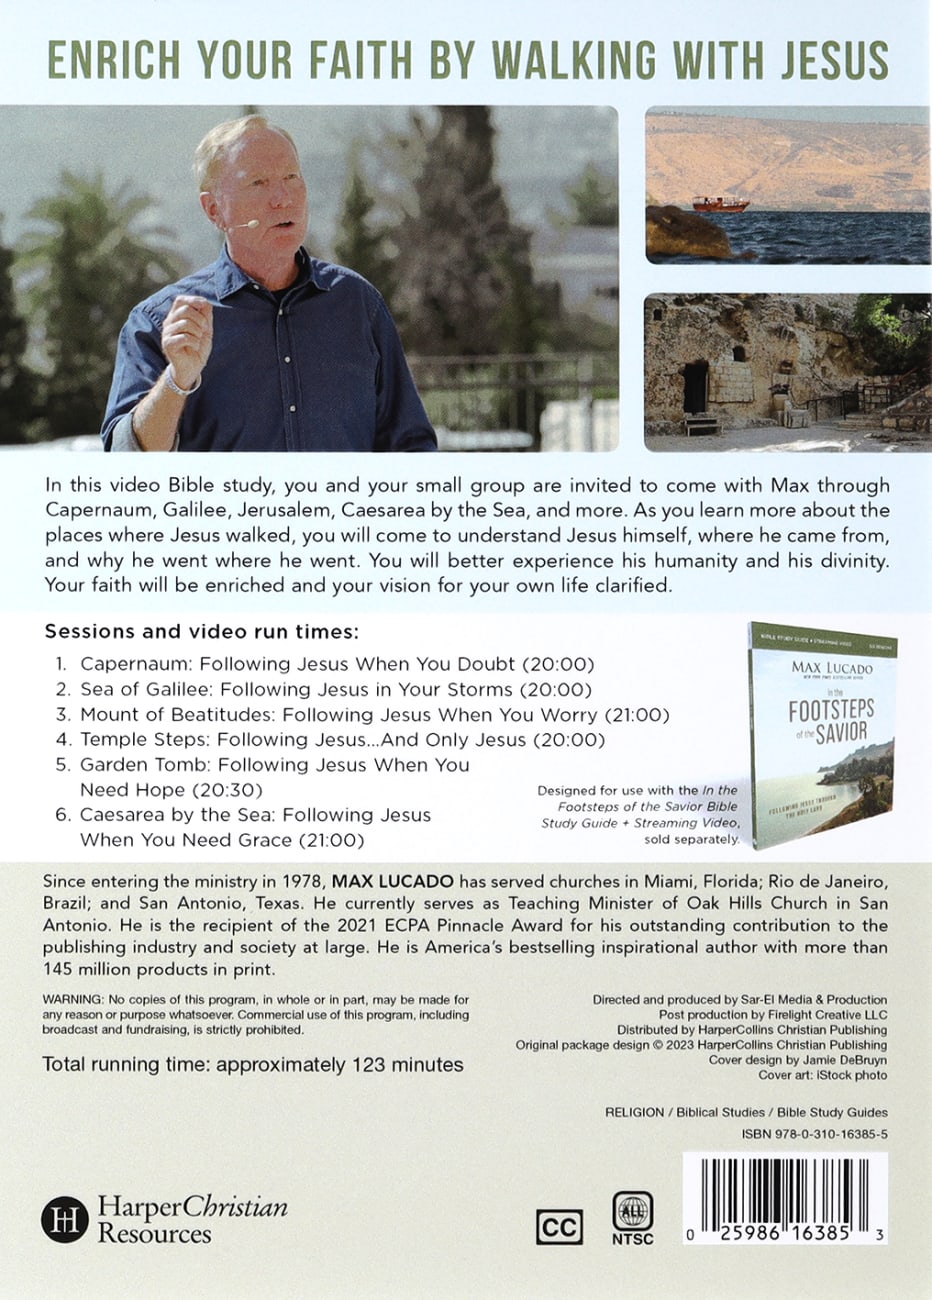 In the Footsteps of the Savior: Following Jesus Through the Holy Land (Video Study) DVD